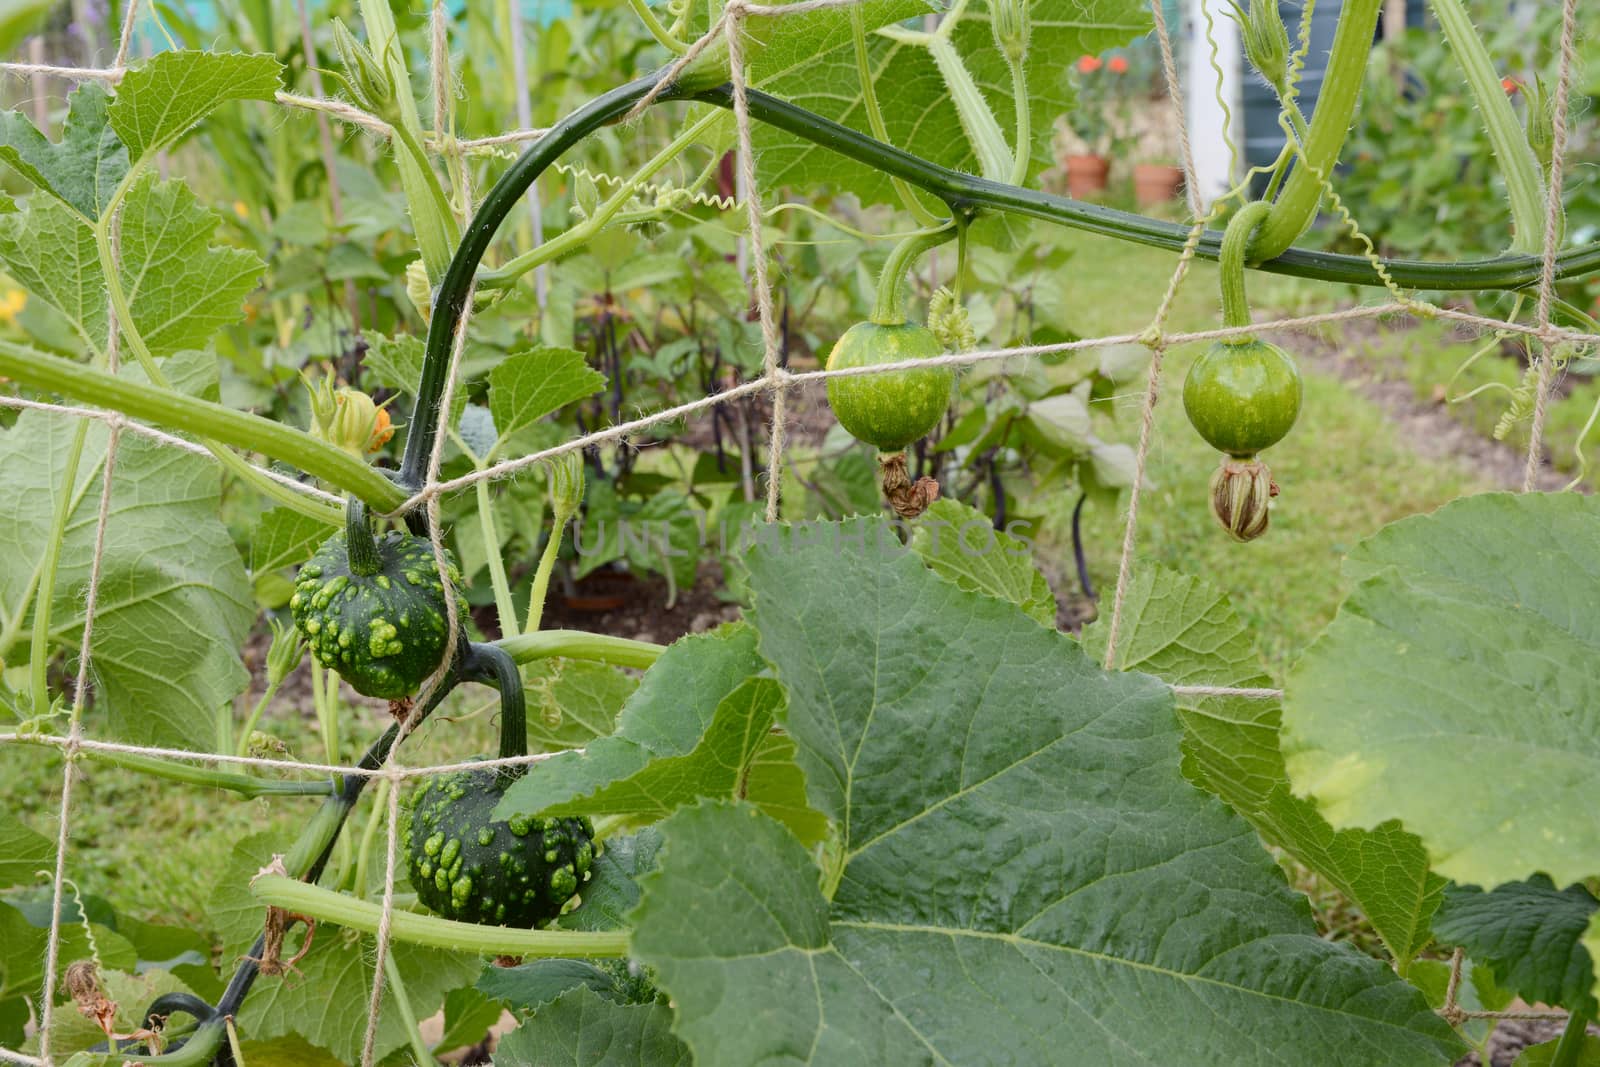 Warted and smooth ornamental gourds grow long vines, climbing a trellis support